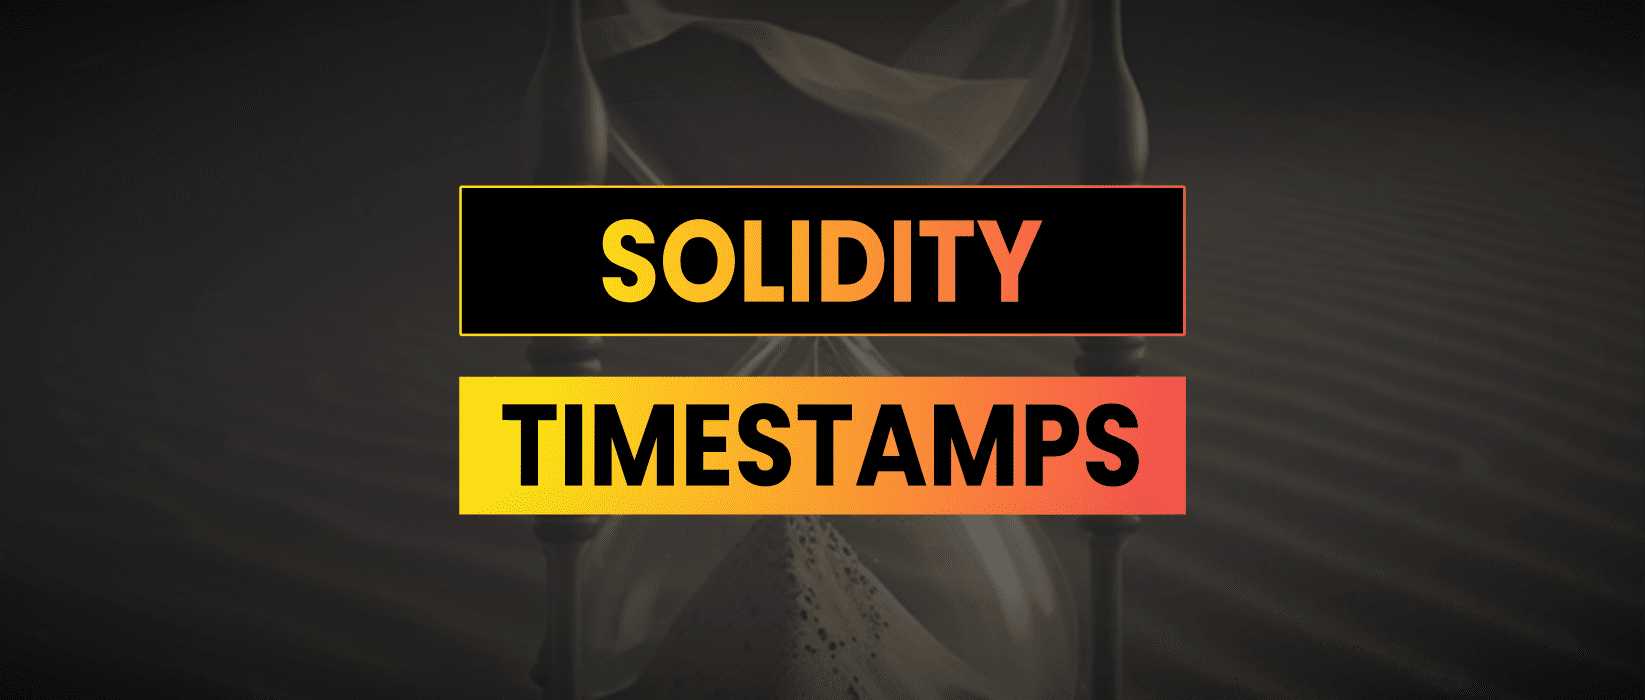 Timestamp in Solidity | Solidity Tips & Examples